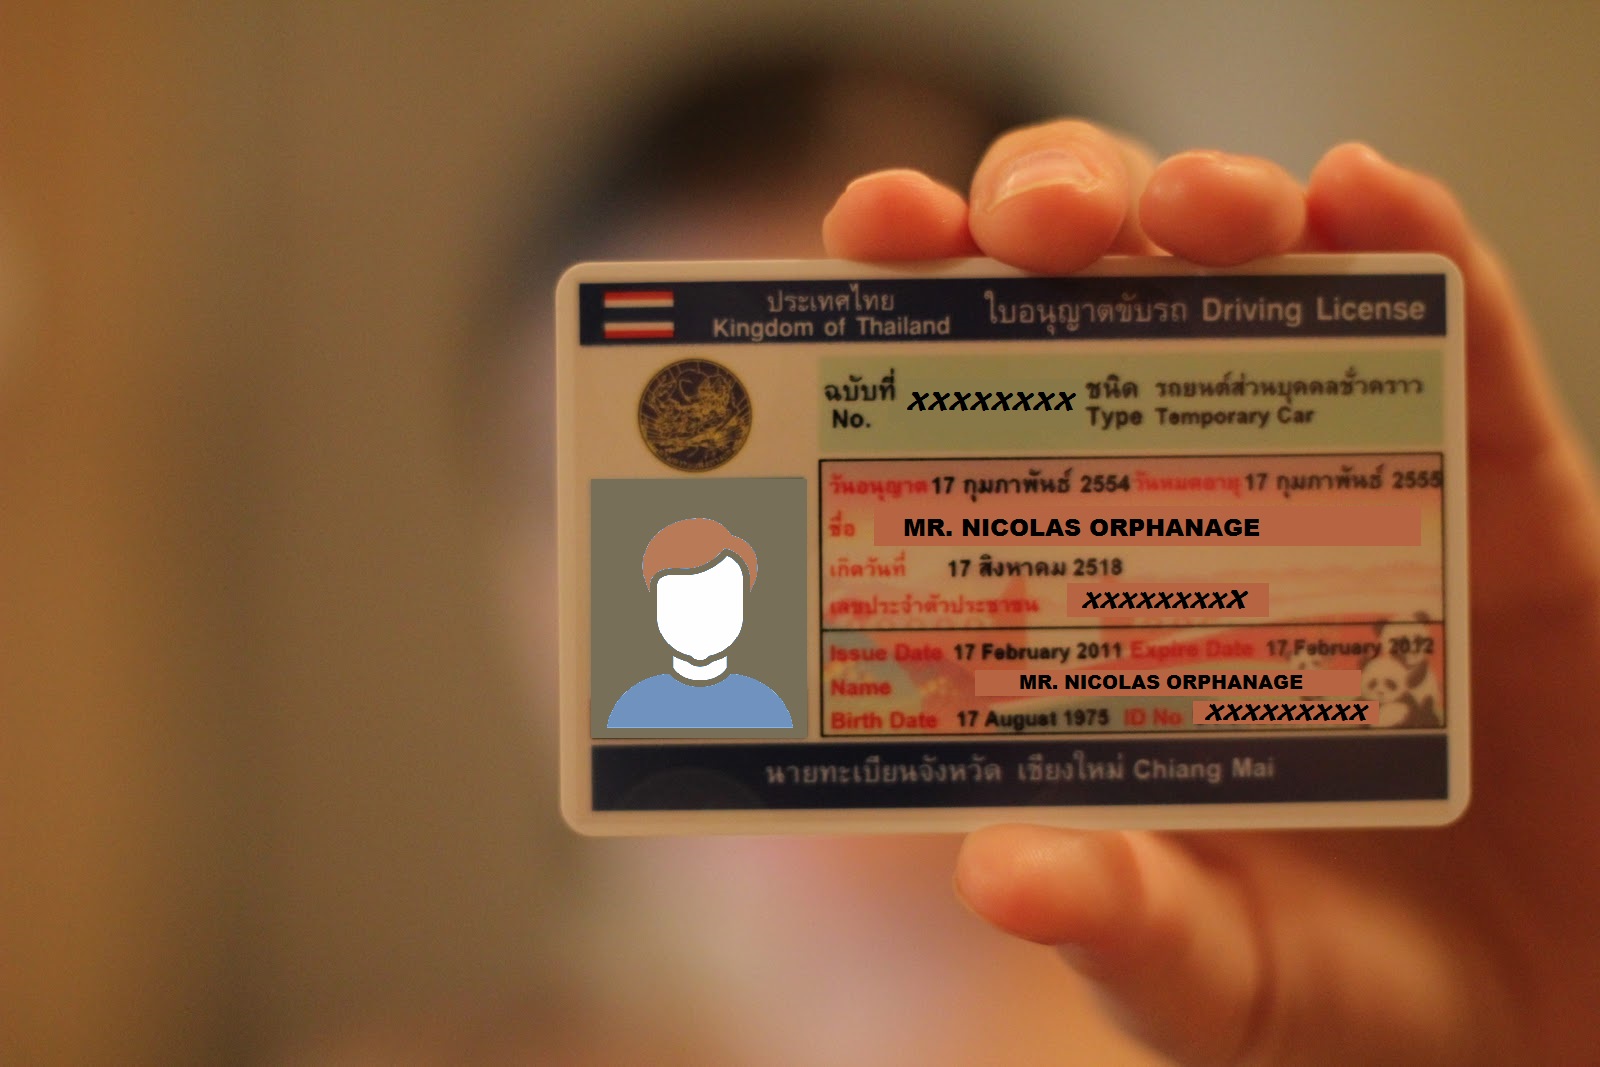 Conditions for foreigners to change driving licenses in Vietnam